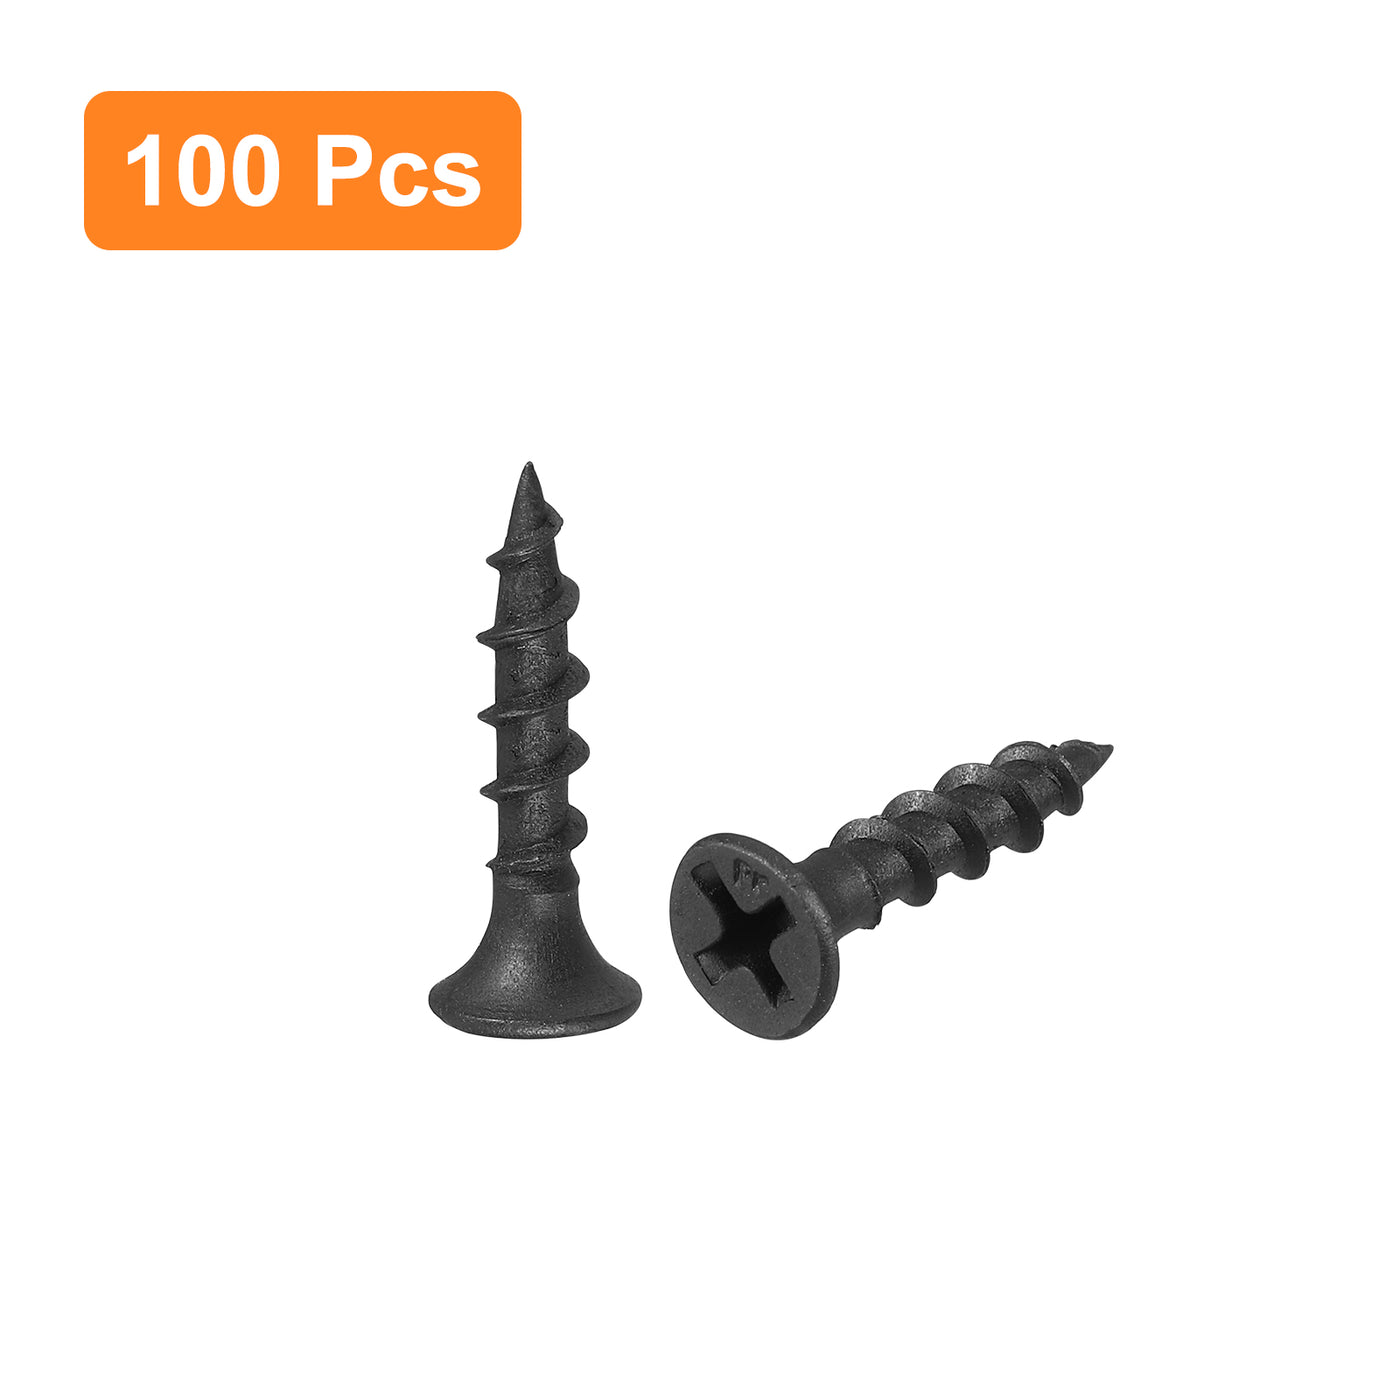 uxcell Uxcell M3.8x19mm 100pcs Phillips Drive Wood Screws, Carbon Steel Self Tapping Screws